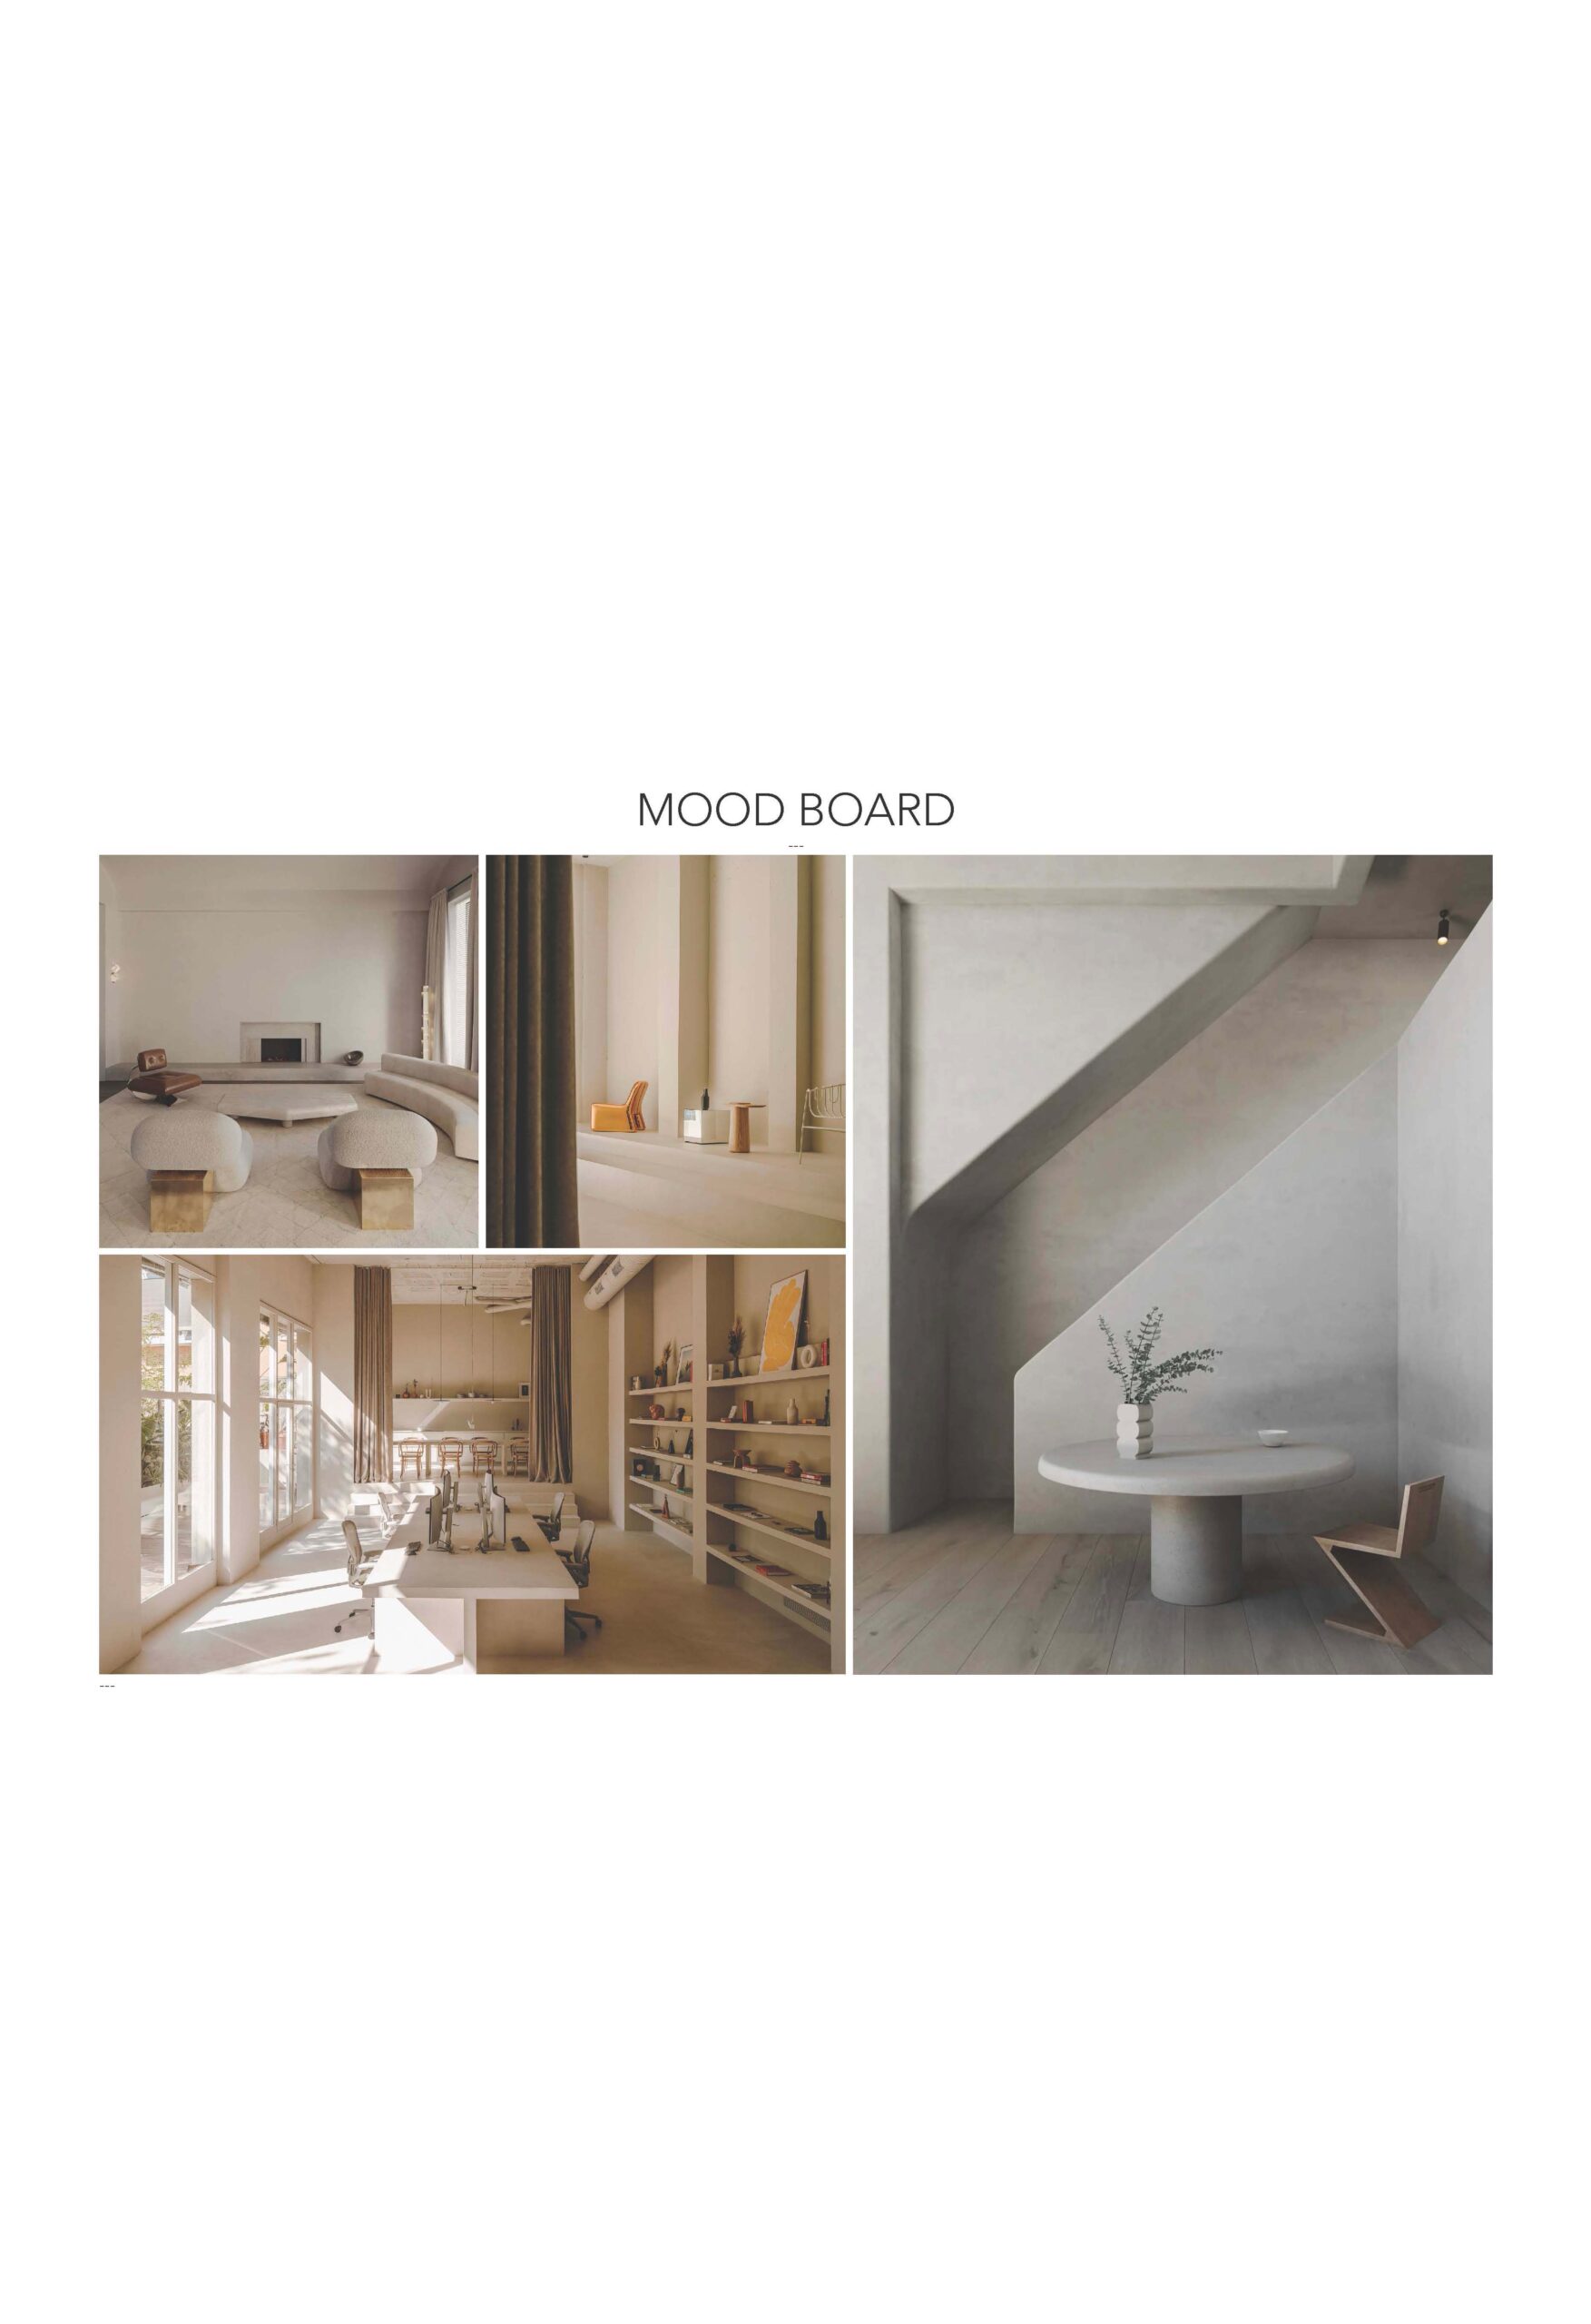 By Design – Mood Boards & How We Create Them